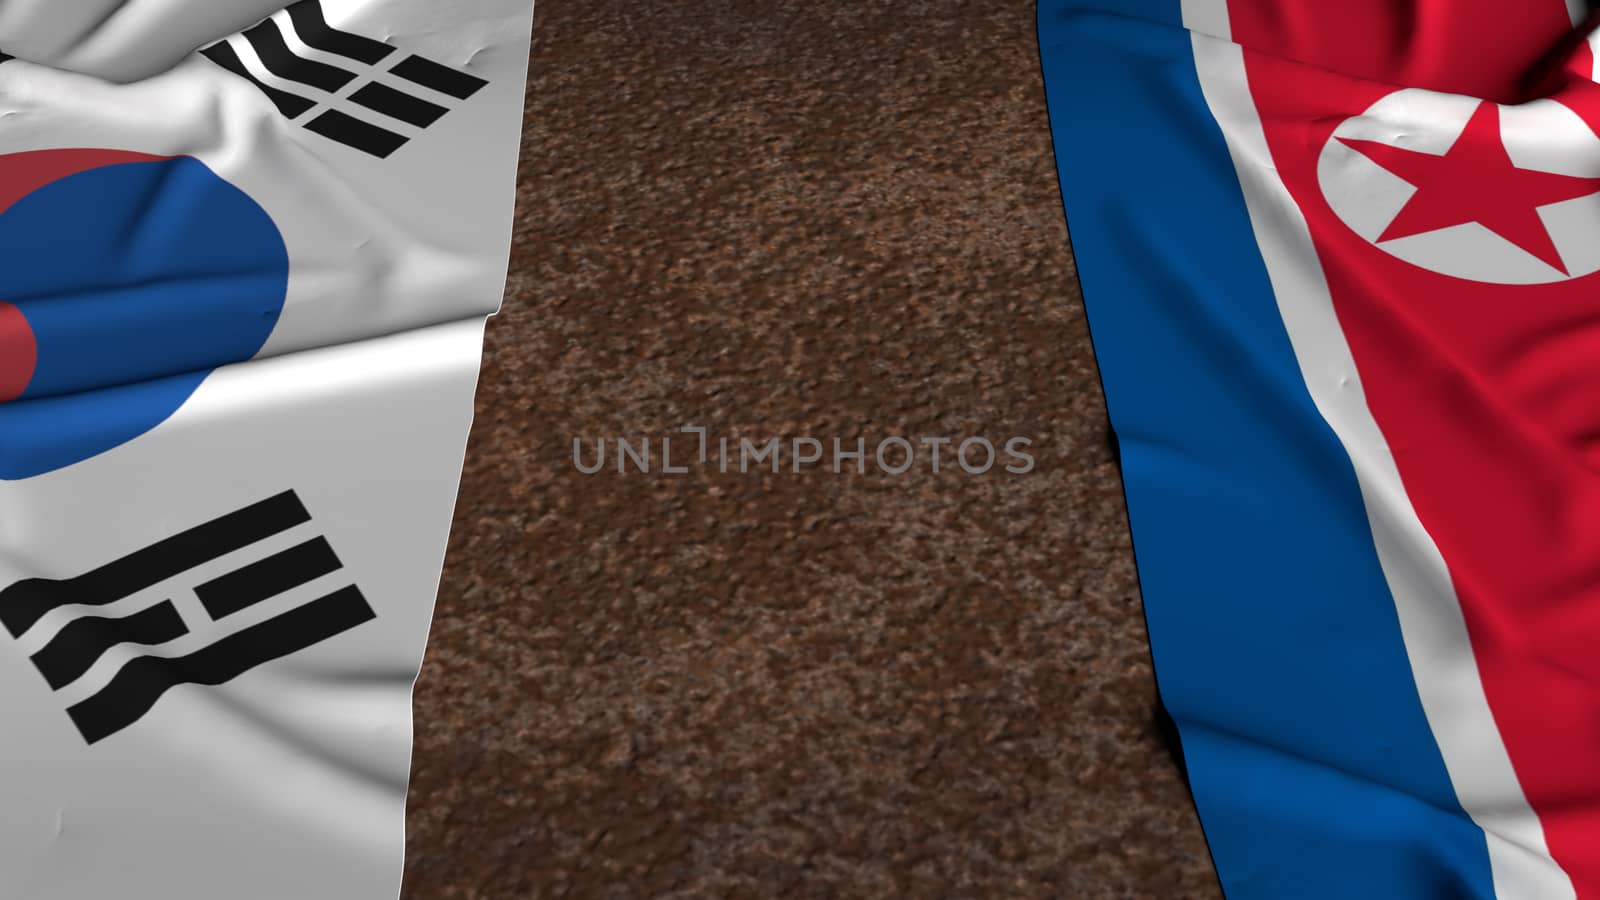 The north Korea and south Korea flags on rusty background 3d rendering for  border content.
